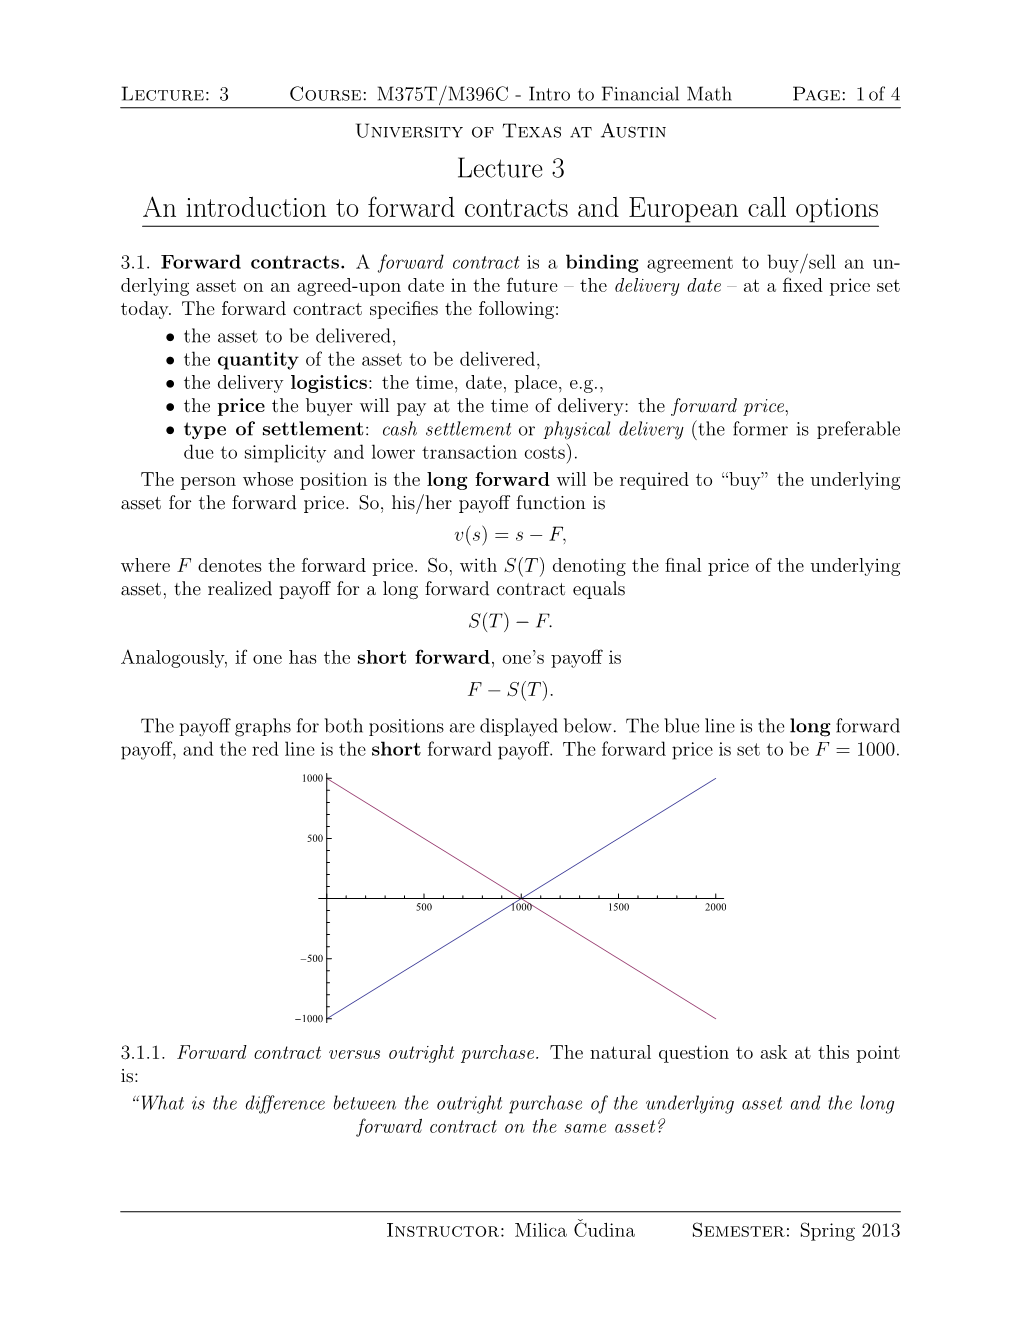 Lecture 3 an Introduction to Forward Contracts and European Call Options